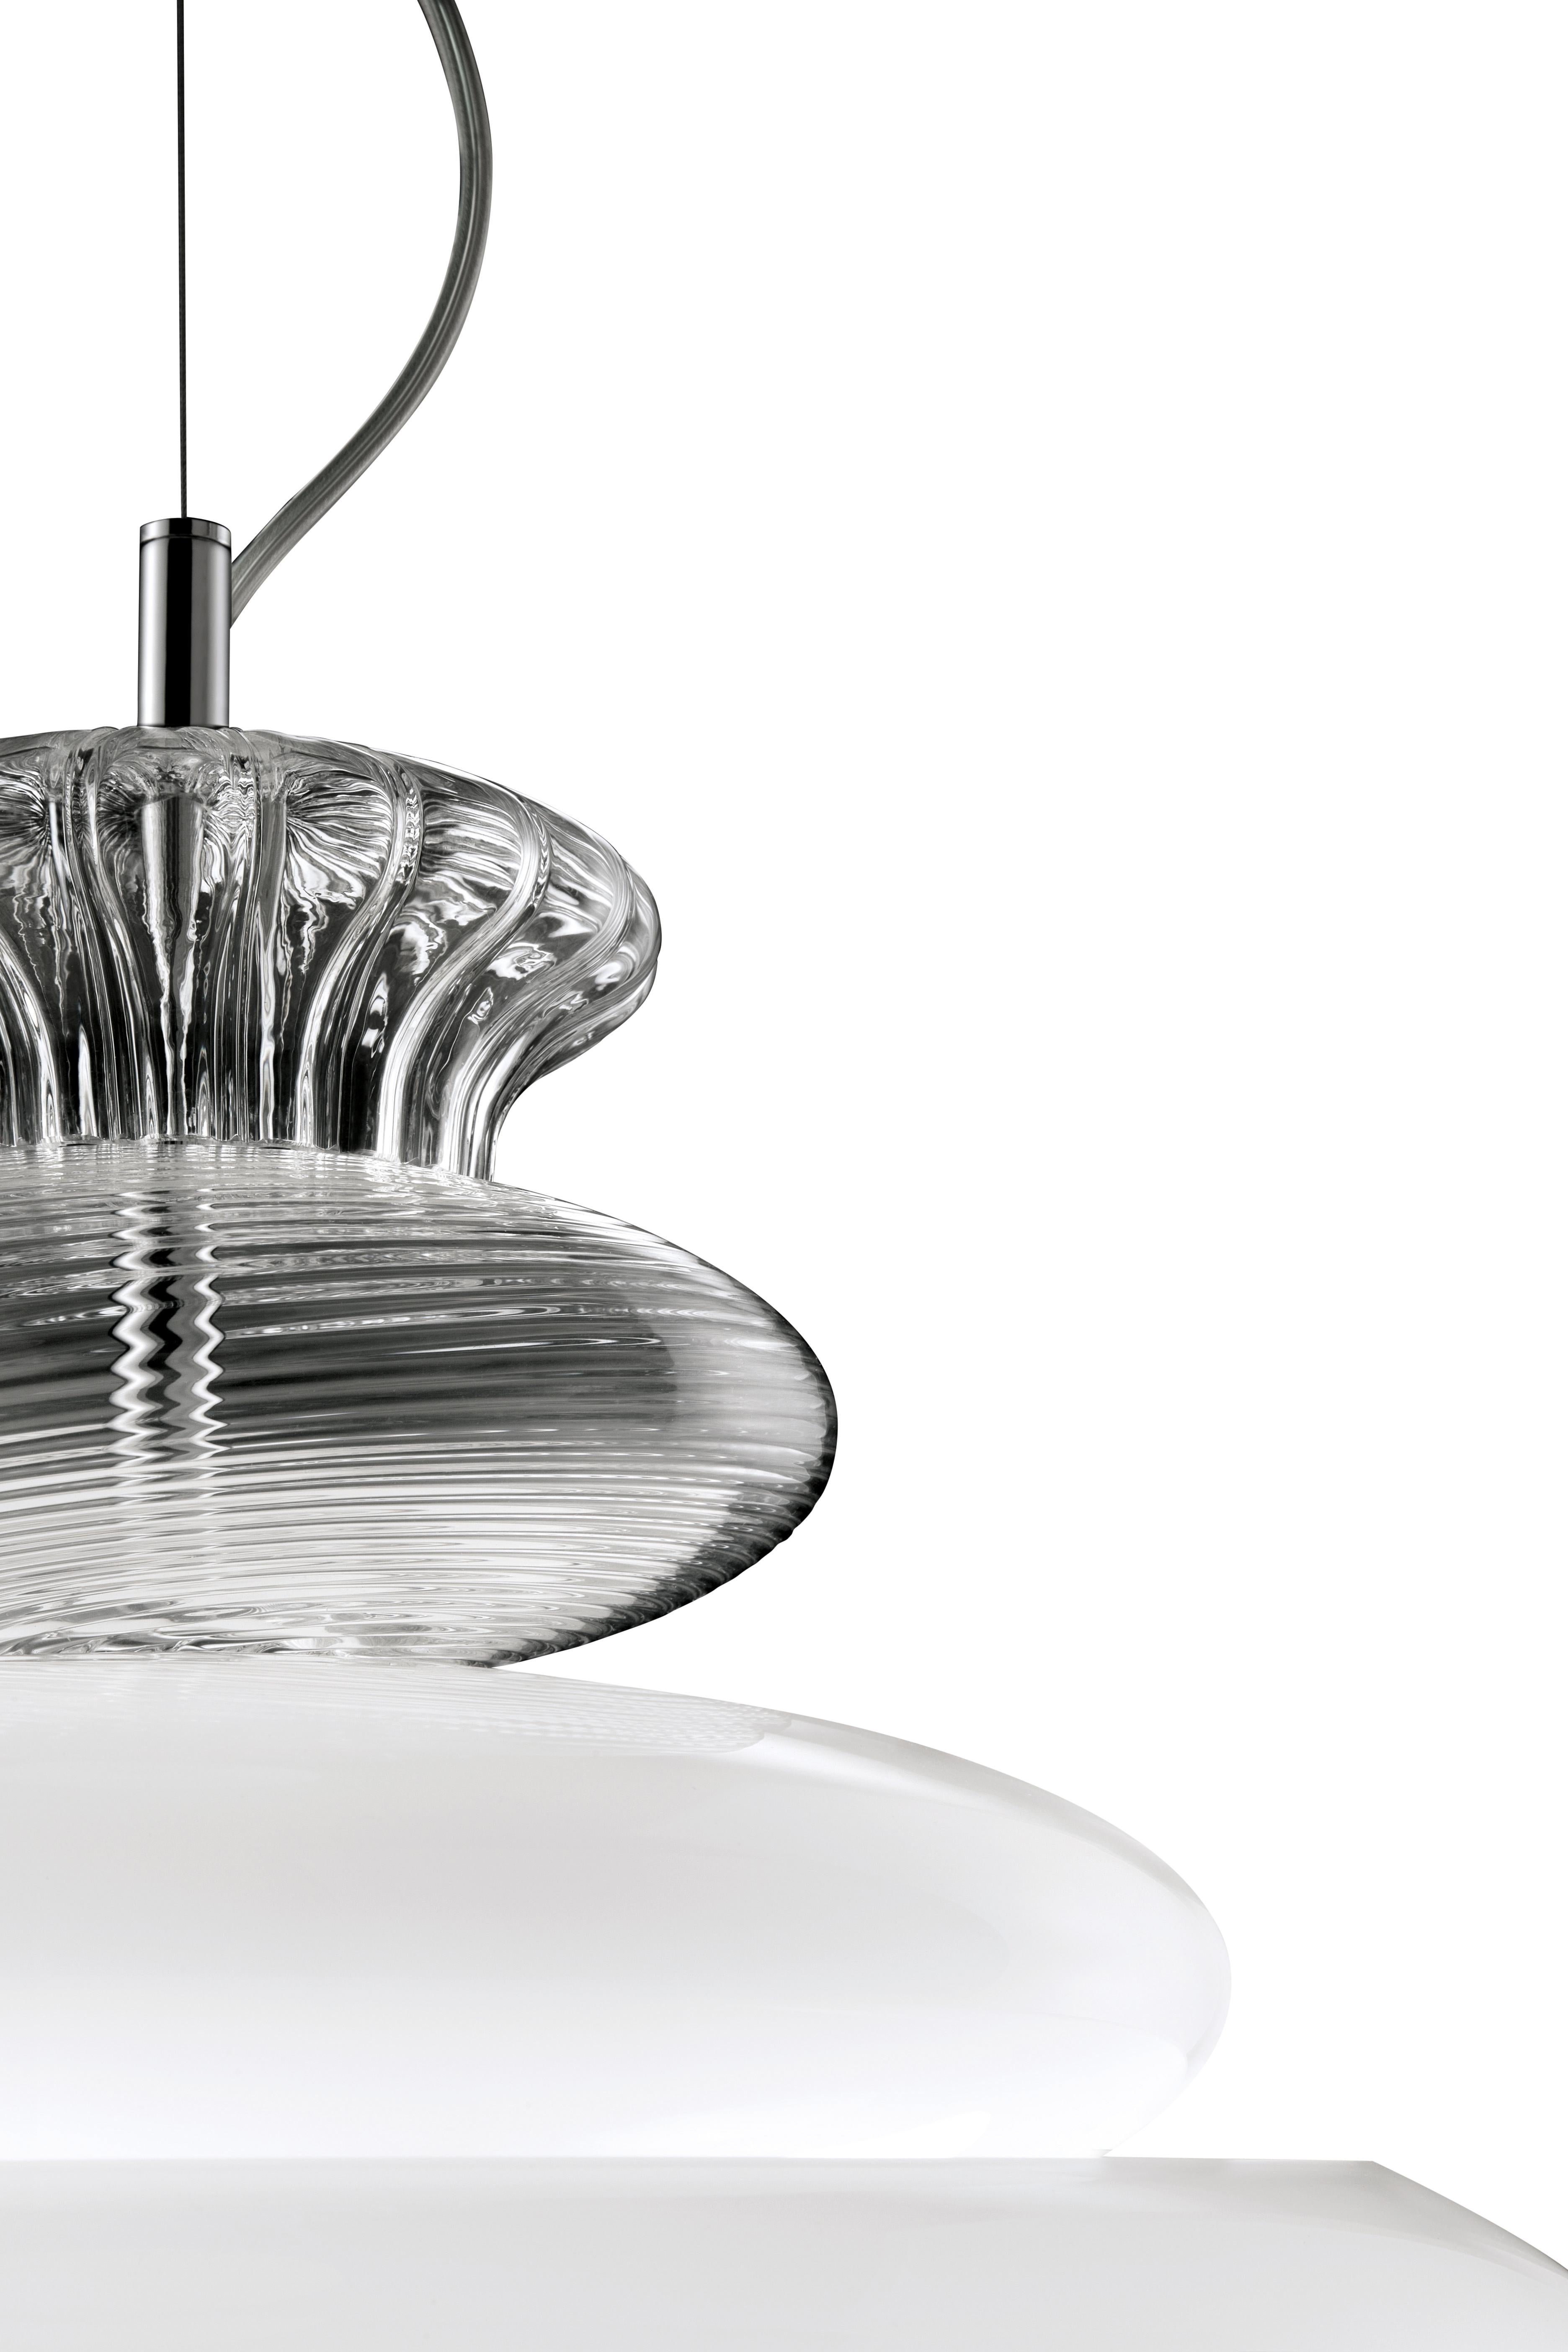 Italian Pigalle 5692 Suspension Lamp in White/Crystal Glass, by Barovier&Toso